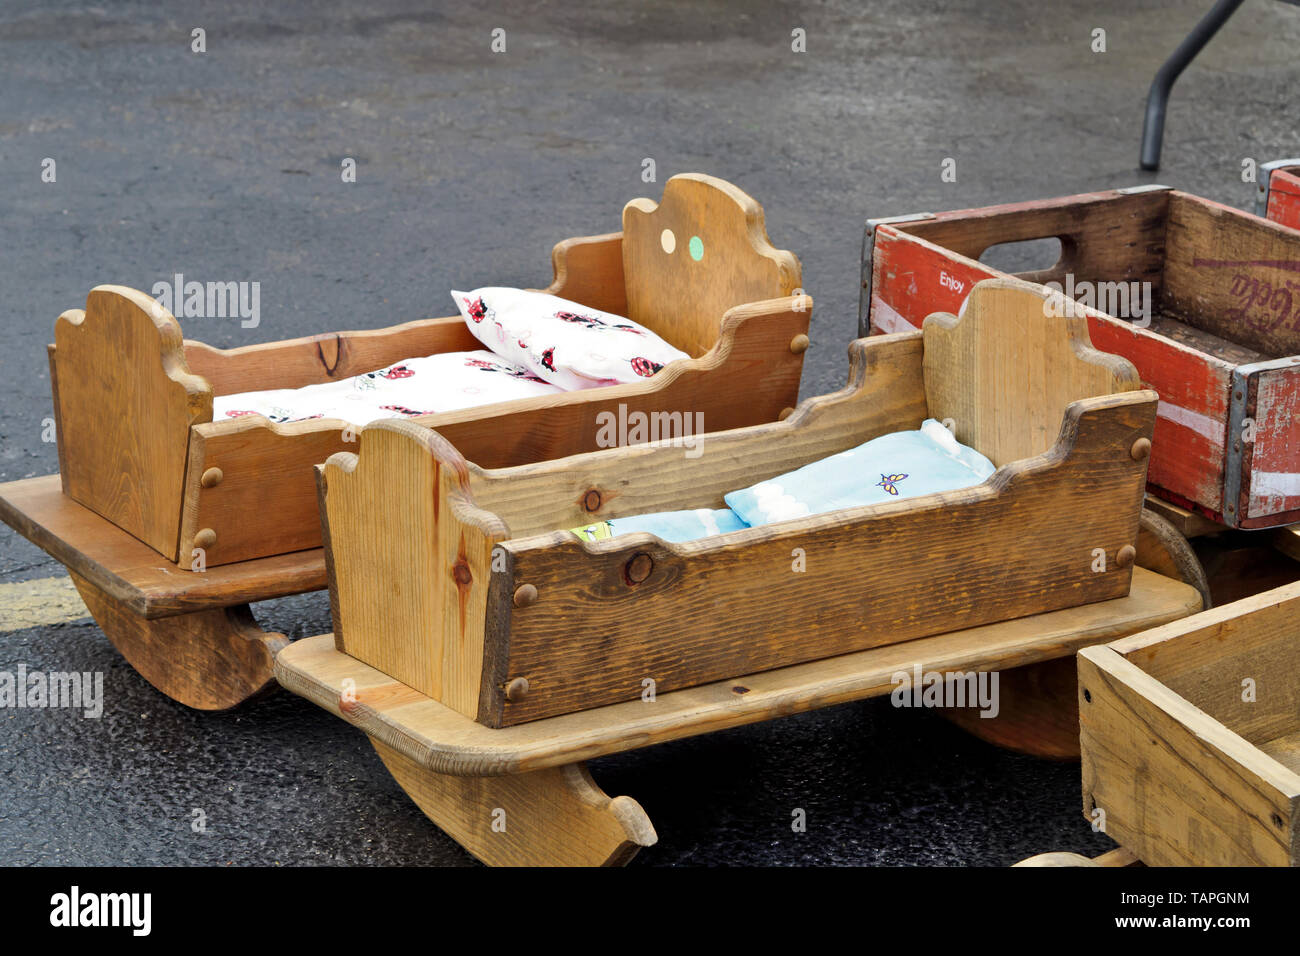 Wooden Cradles High Resolution Stock Photography and Images - Alamy